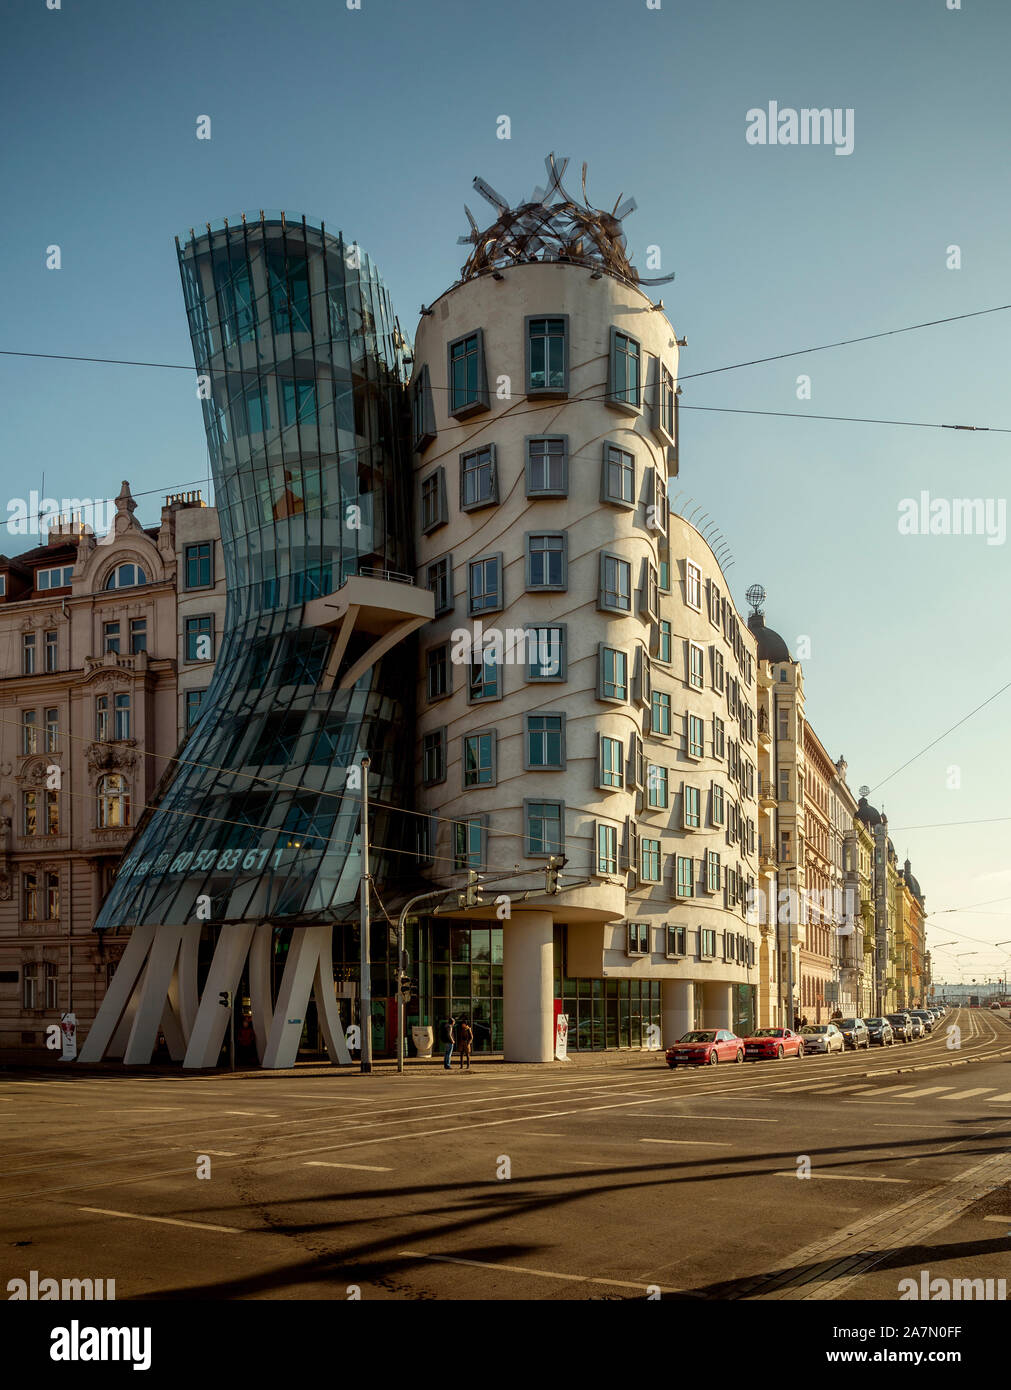 PRAGUE, CZECH REPUBLIC - FEBRUARY 18, 2016: Modern building, also known as the Dancing House, designed by Vlado Milunic and Frank O. Gehry stands on t Stock Photo